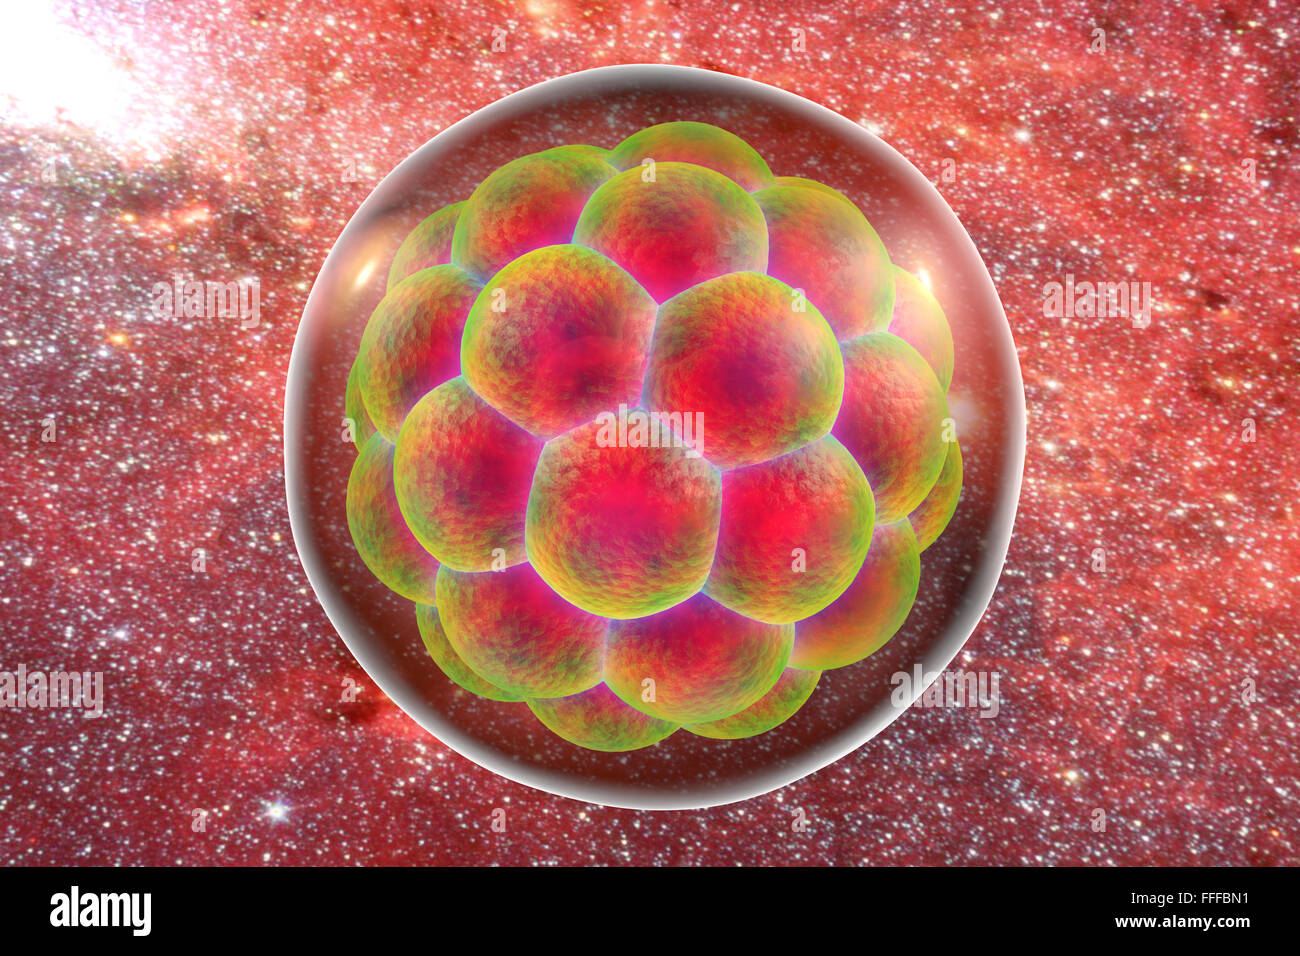 Illustration of a human multi-cellular embryo on a space background. Stock Photo